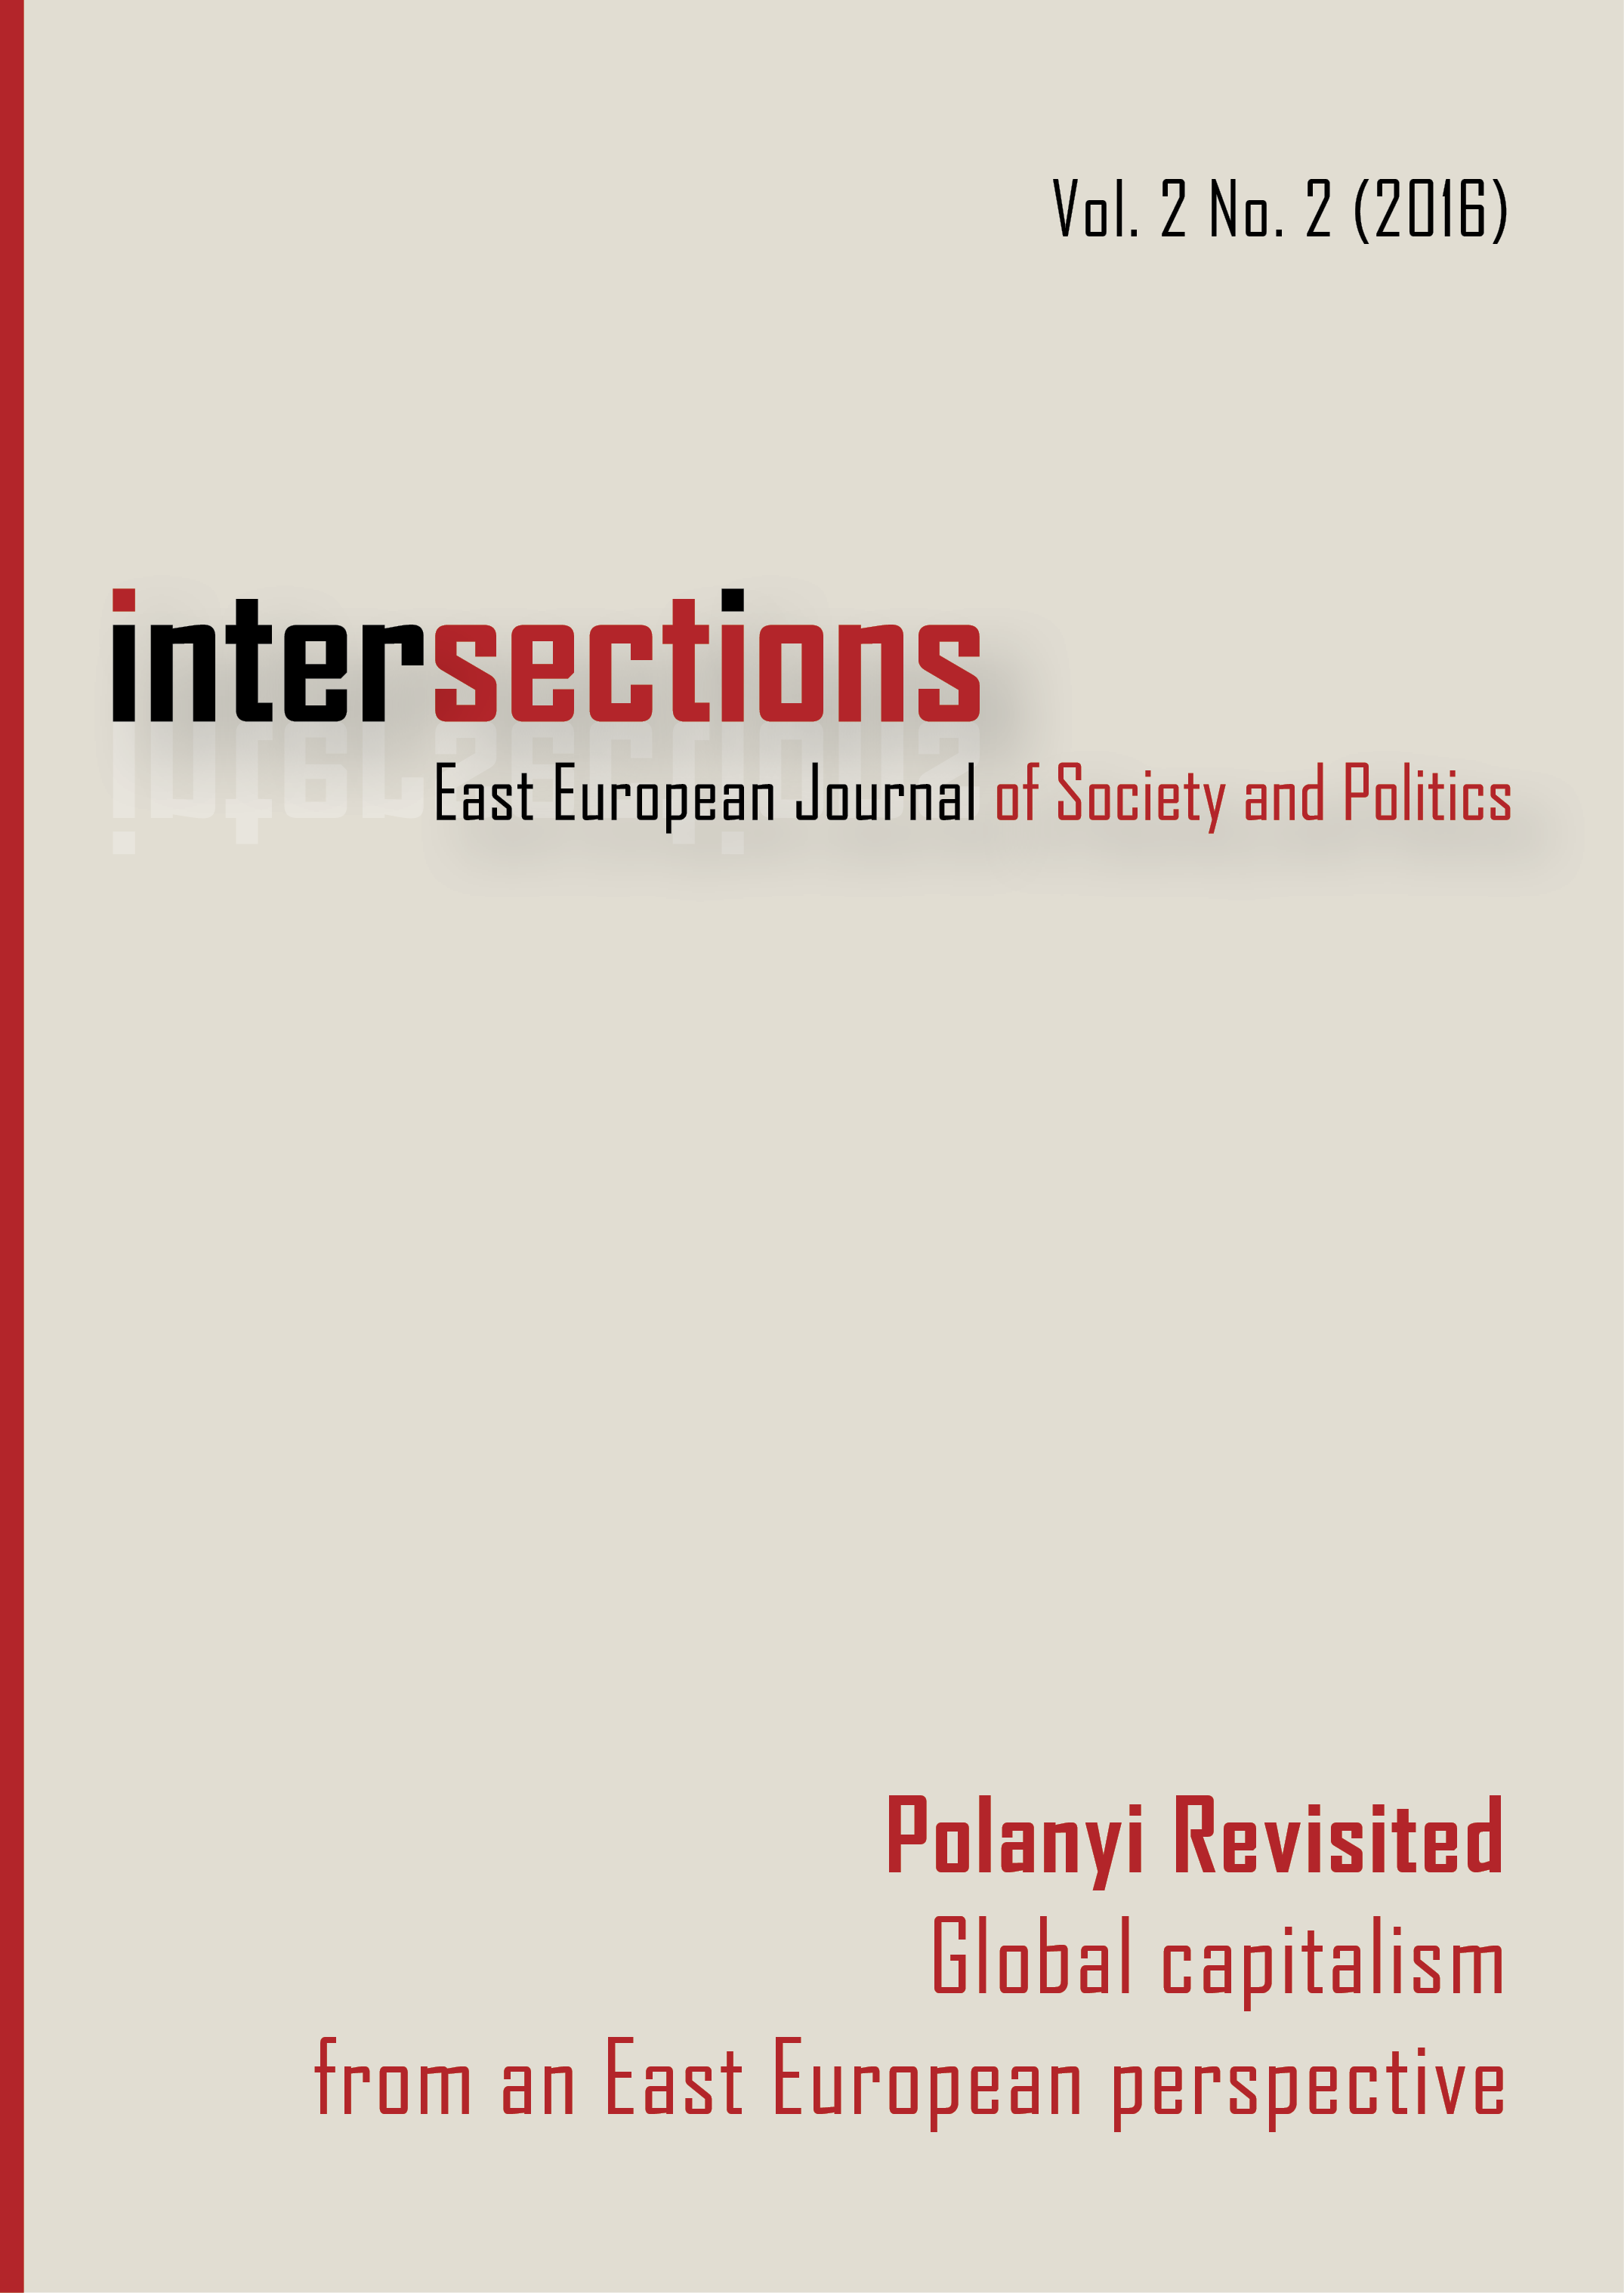 					View Vol. 2 No. 2 (2016): Polanyi Revisited: Global Capitalism from an East European Perspective
				